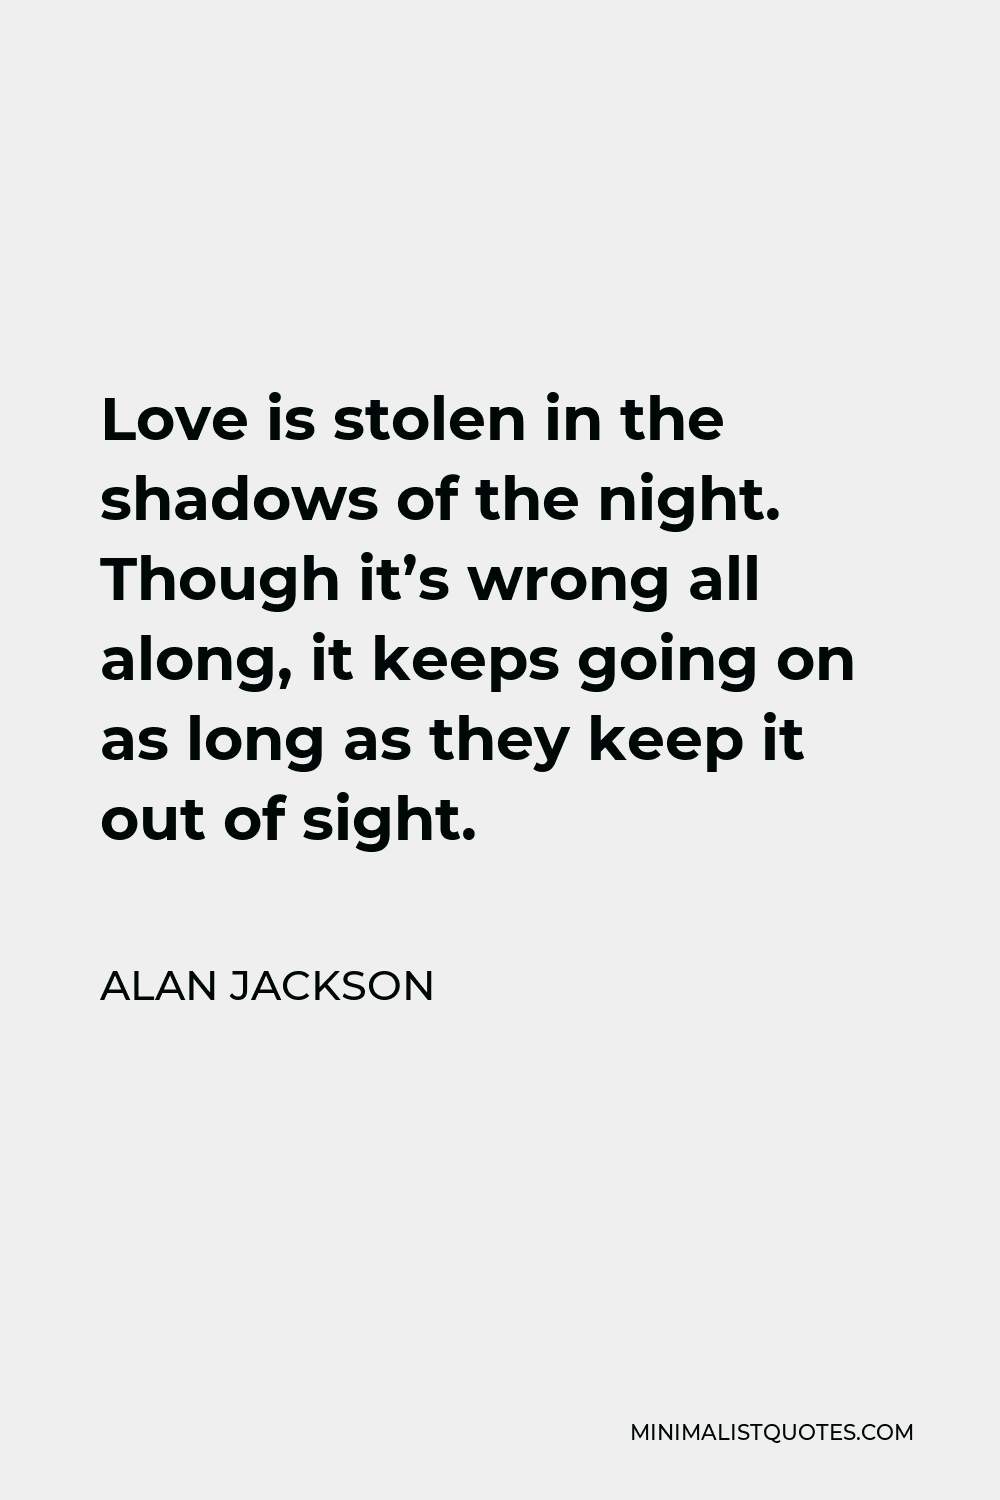 Alan Jackson Quote - Love is stolen in the shadows of the night. Though it’s wrong all along, it keeps going on as long as they keep it out of sight.